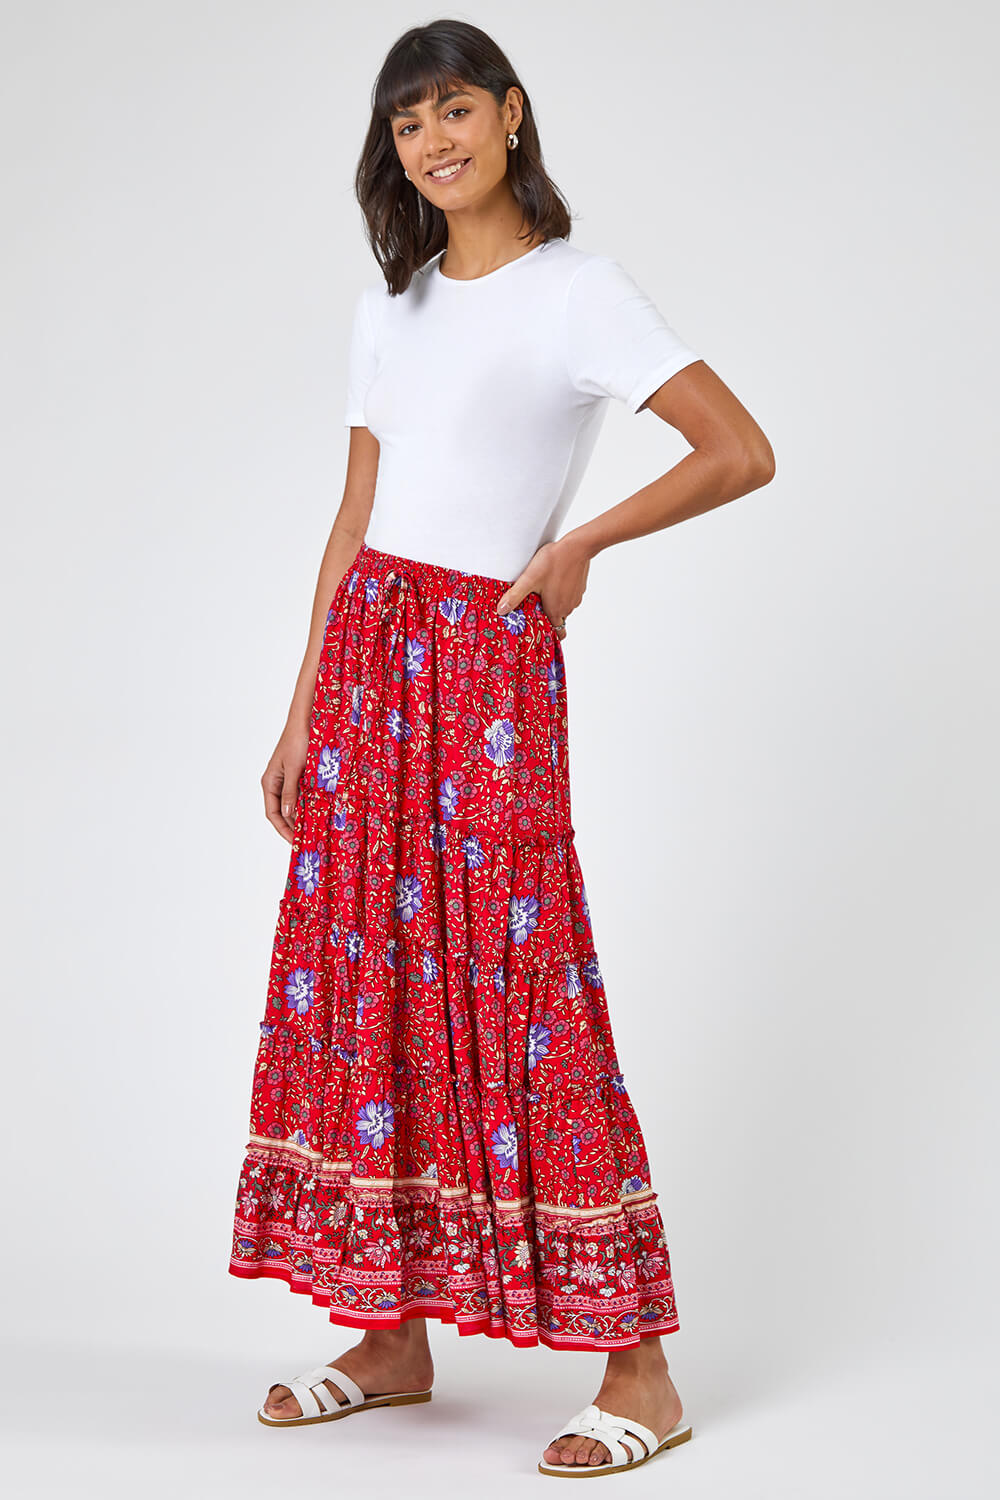 Red Boho Floral Print Tiered Maxi Skirt, Image 3 of 5